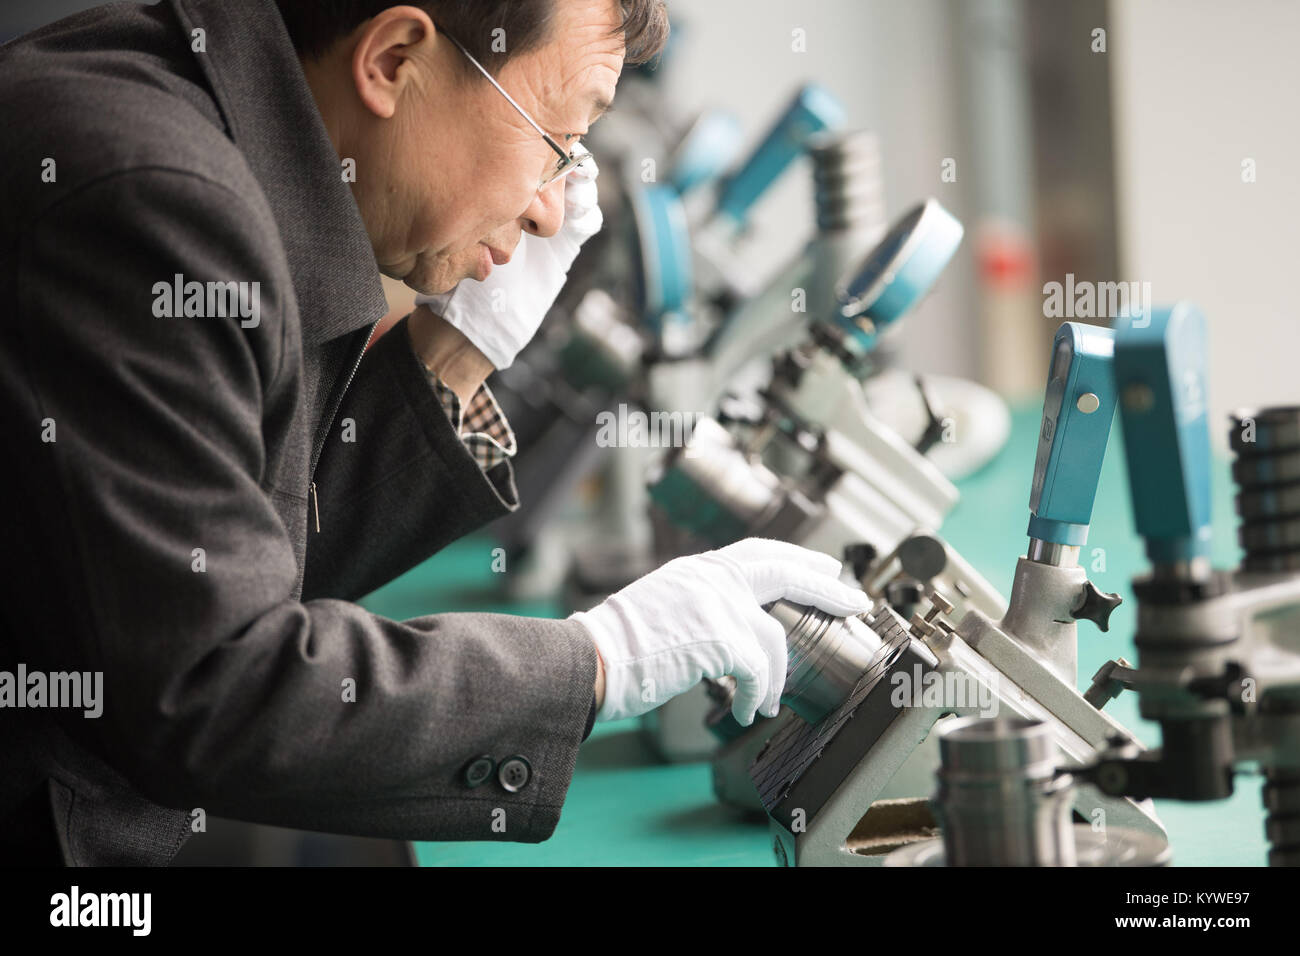 Rui'an, China's Zhejiang Province. 16th Jan, 2018. An engineer from Rui'an Hsoar Group checks a component of robots in Rui'an City, east China's Zhejiang Province, Jan. 16, 2018. Over 30 enterprises in Rui'an City purchased more than 500 robots to boost productivity. Credit: Weng Xinyang/Xinhua/Alamy Live News Stock Photo